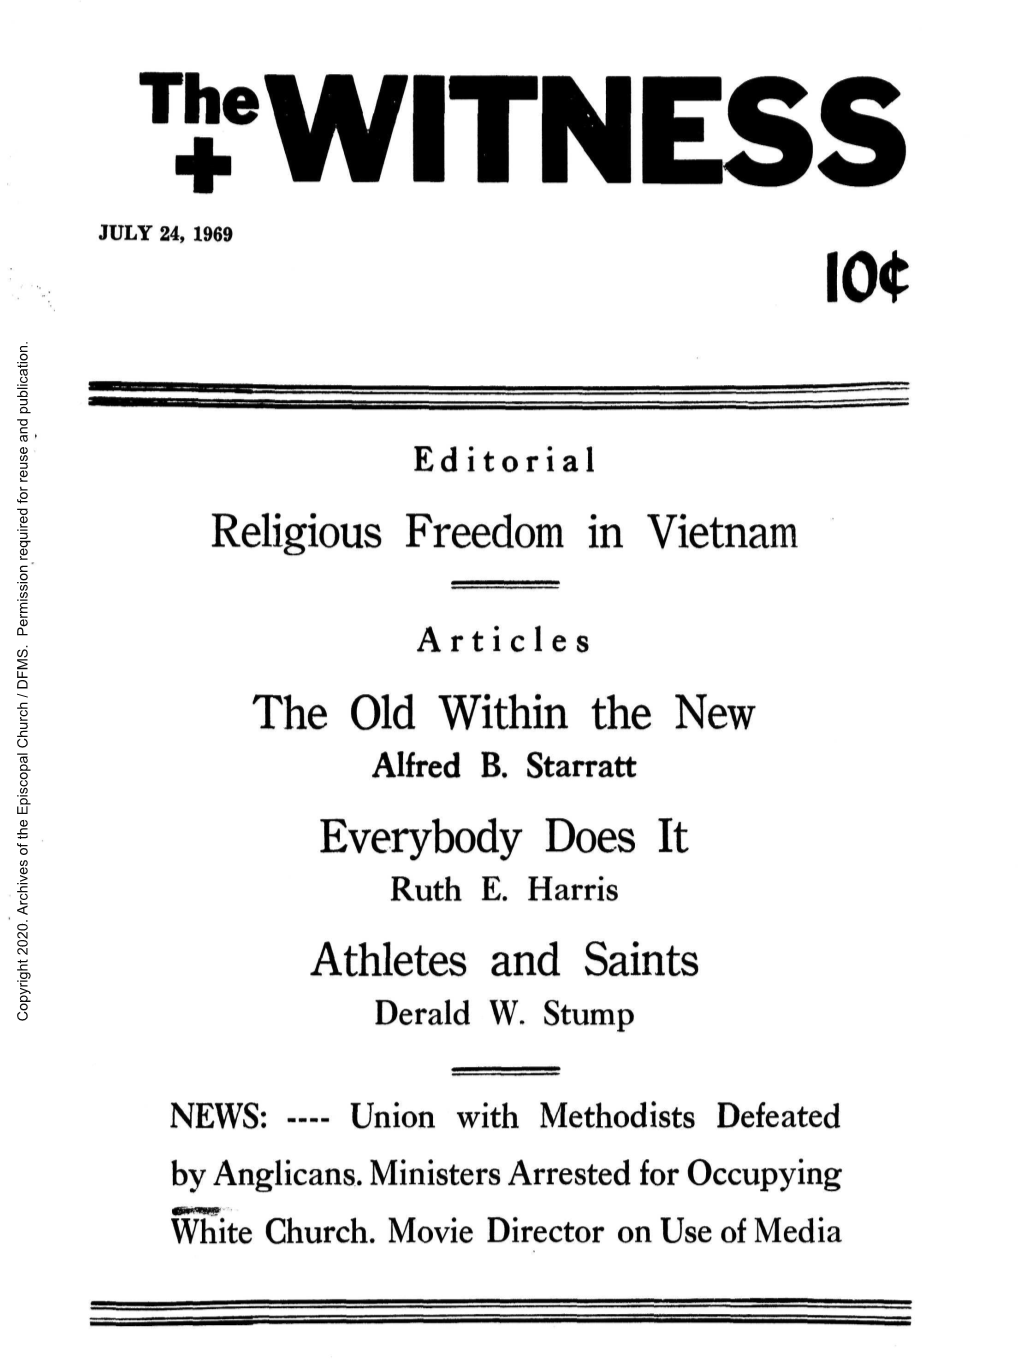 1969 the Witness, Vol. 54, No. 14. July 24, 1969